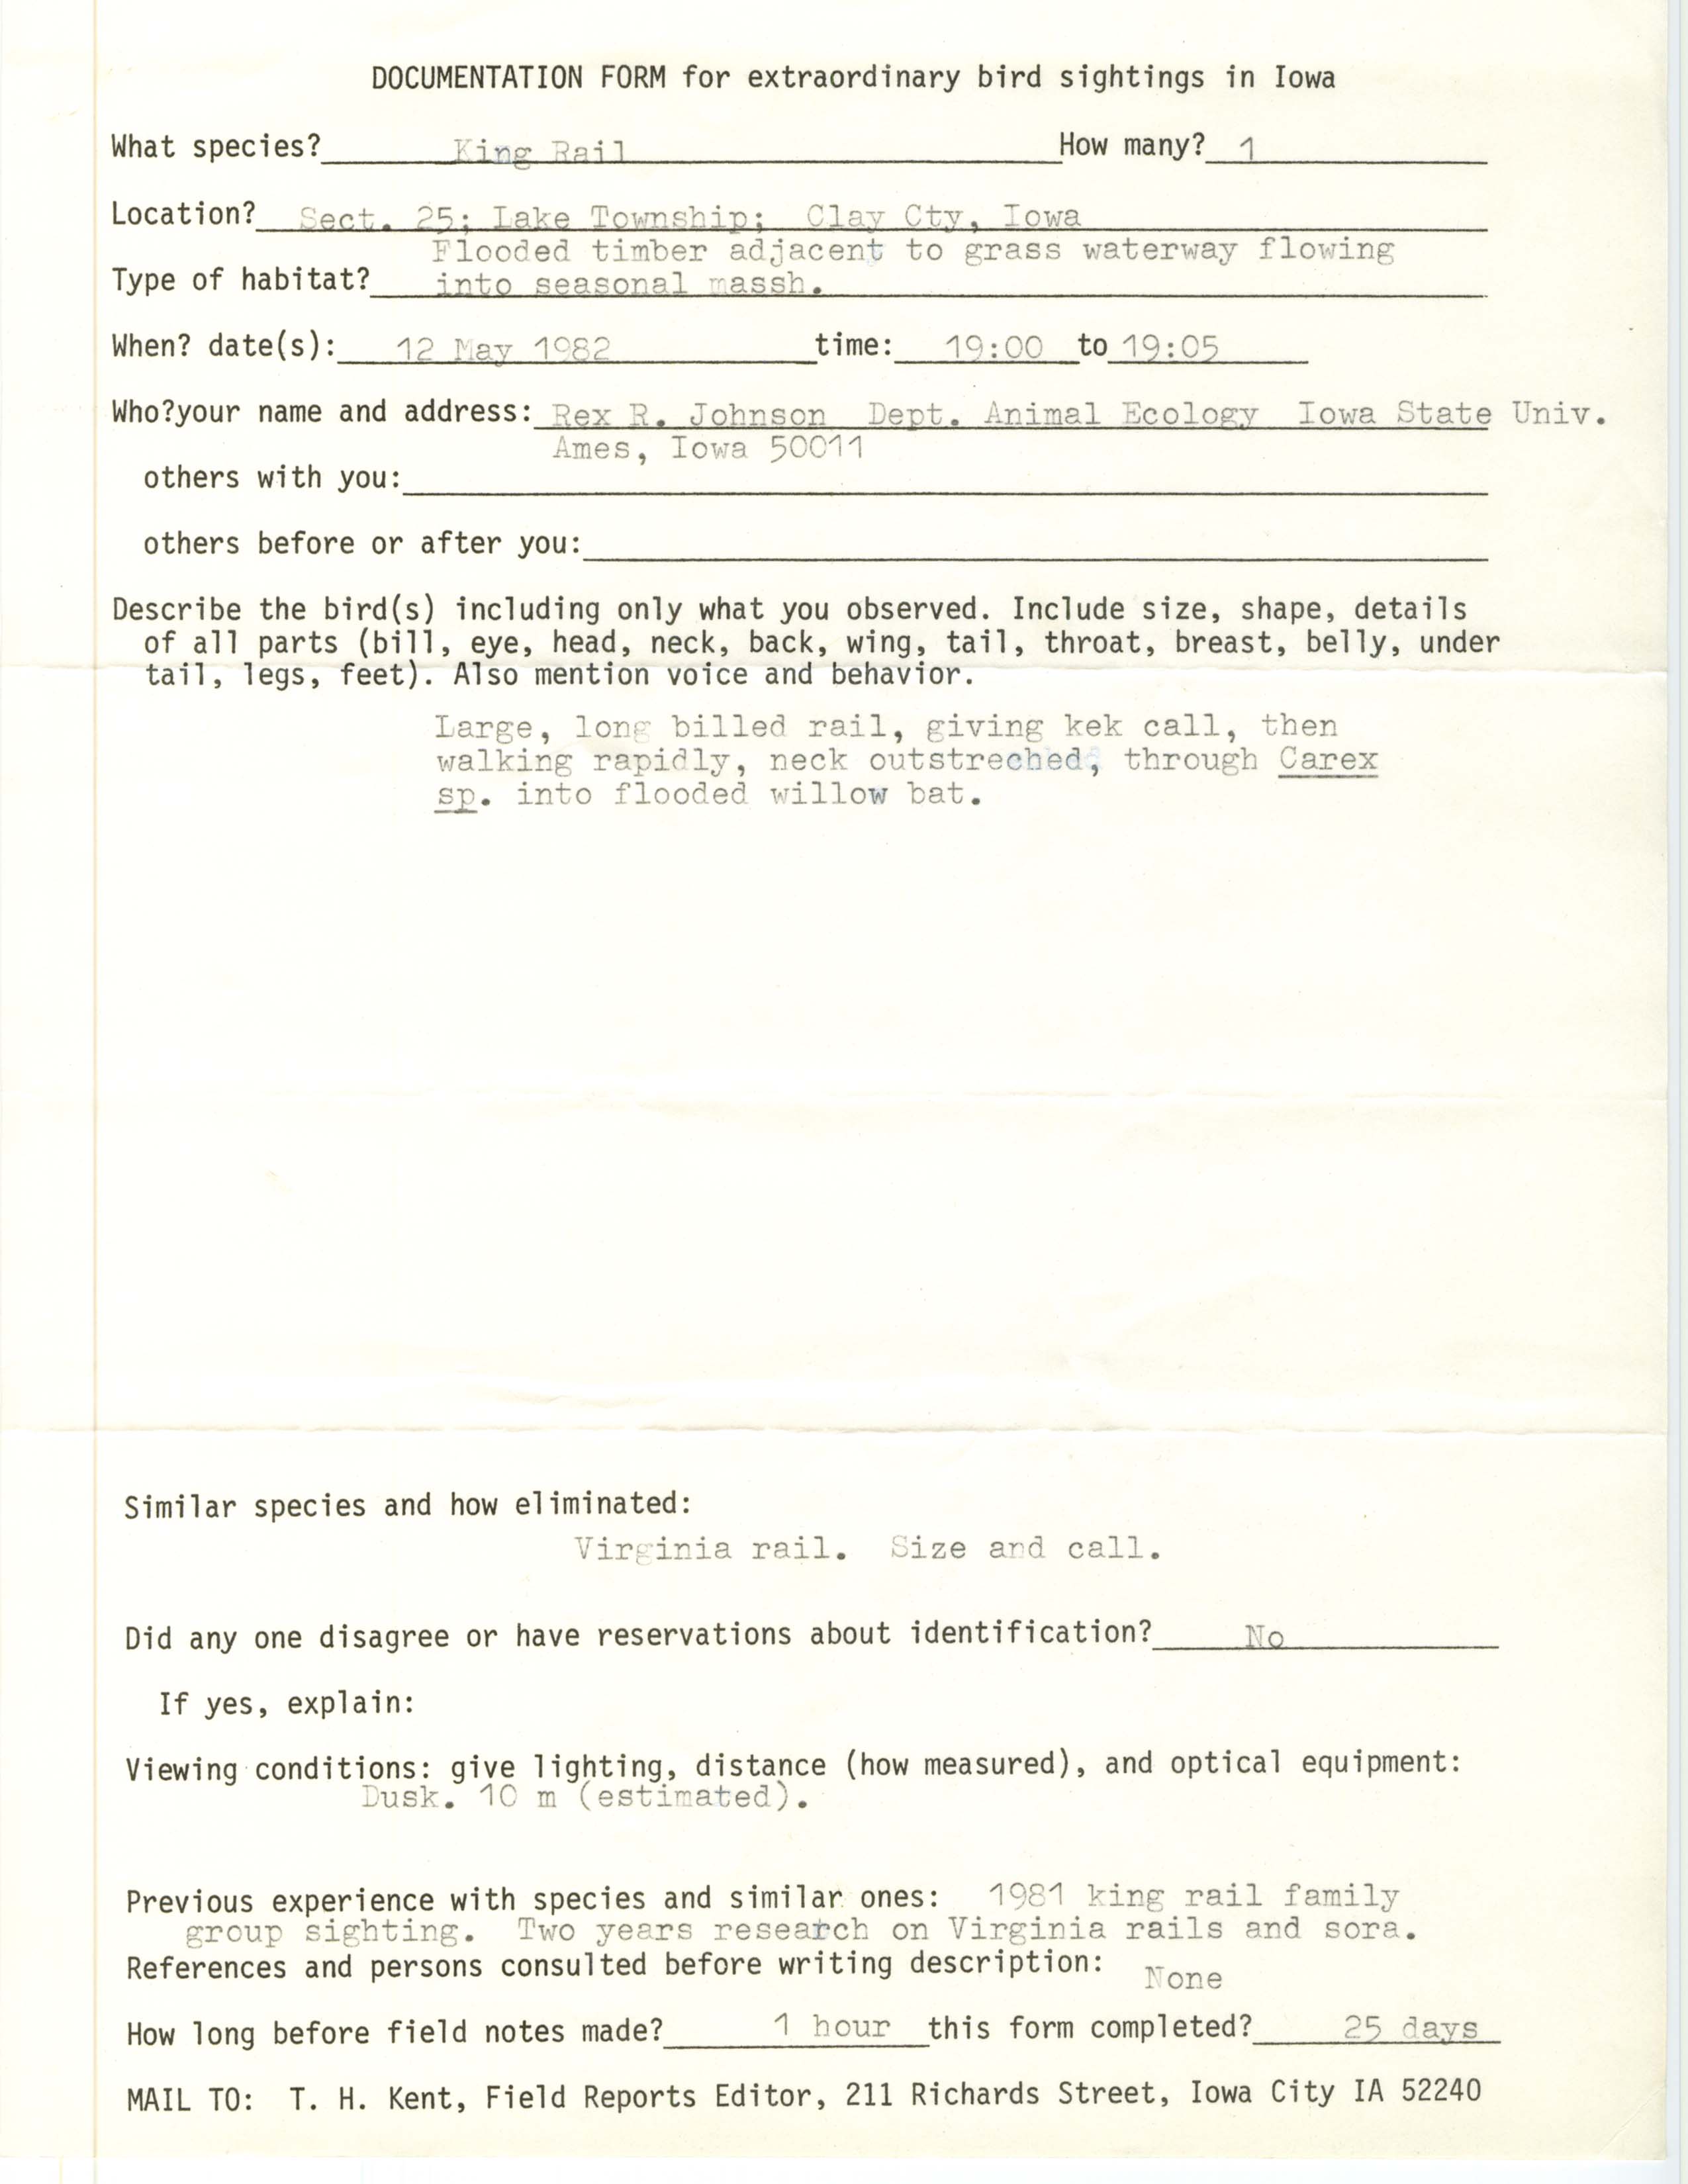 Rare bird documentation form for King Rail at Lake Township in Clay County, 1982